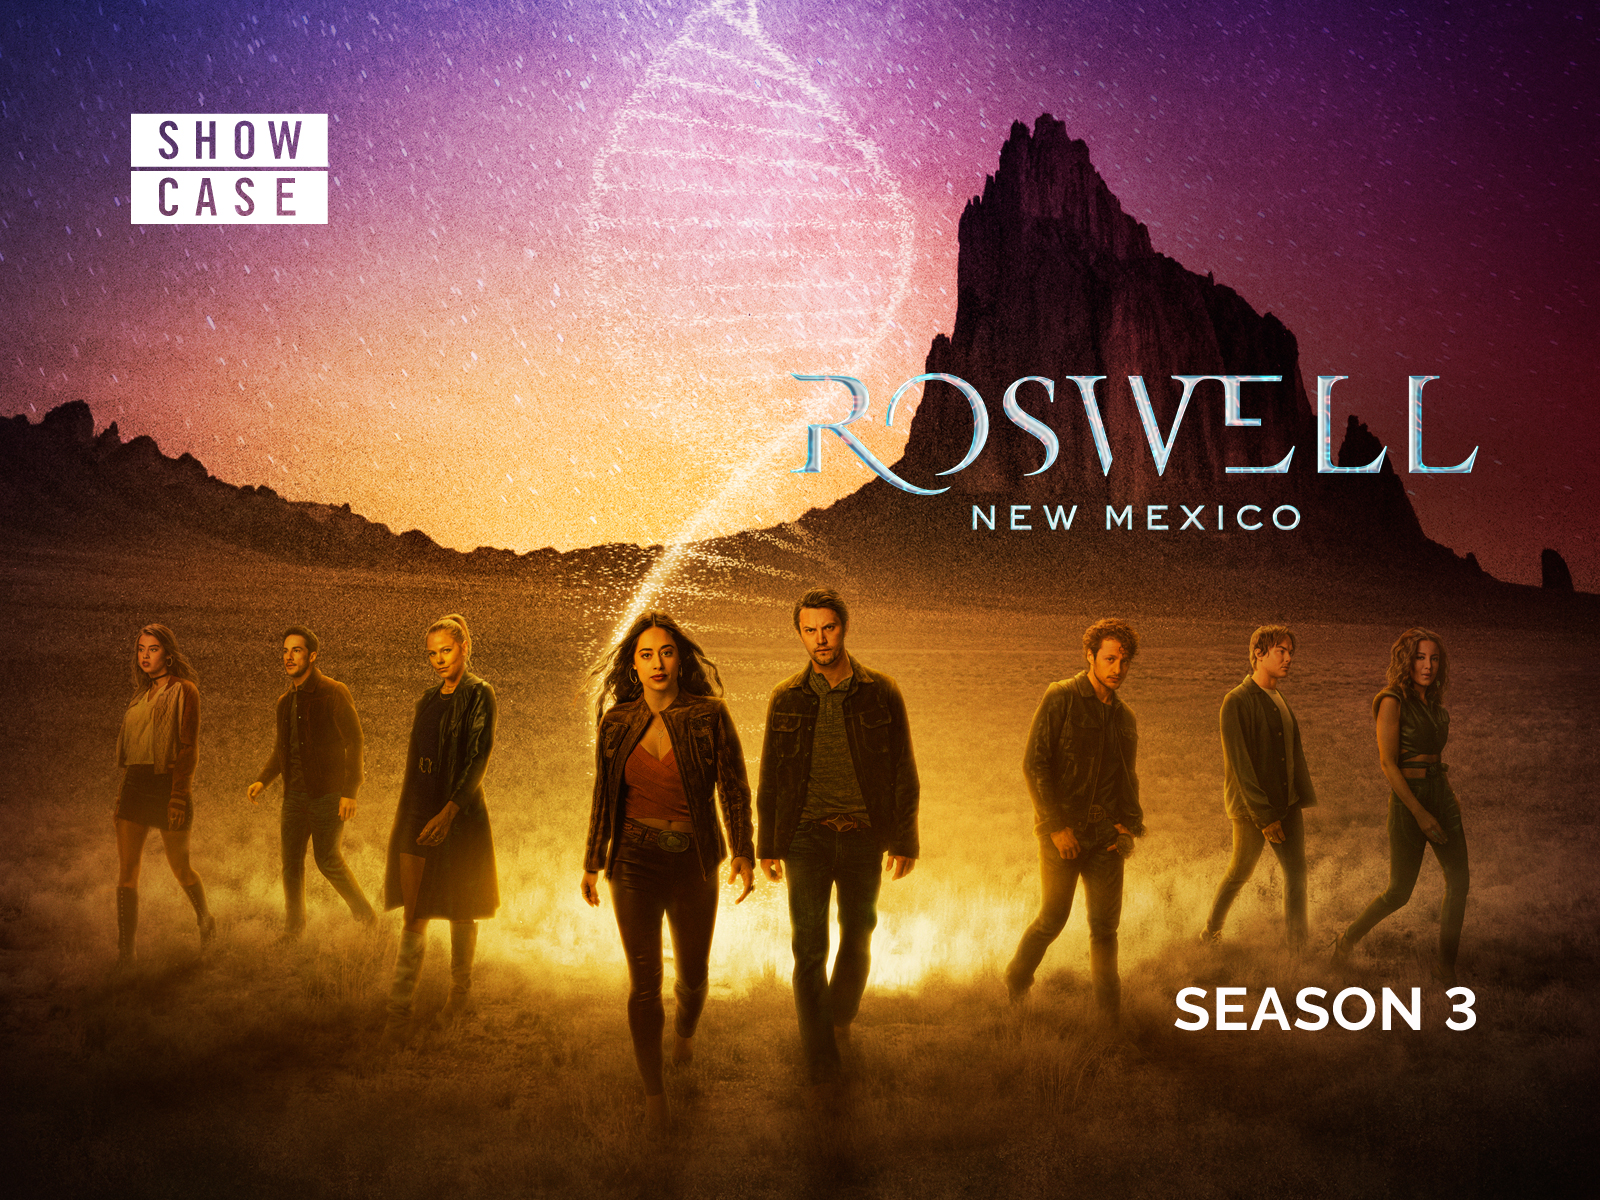 Roswell, New Mexico Wallpapers